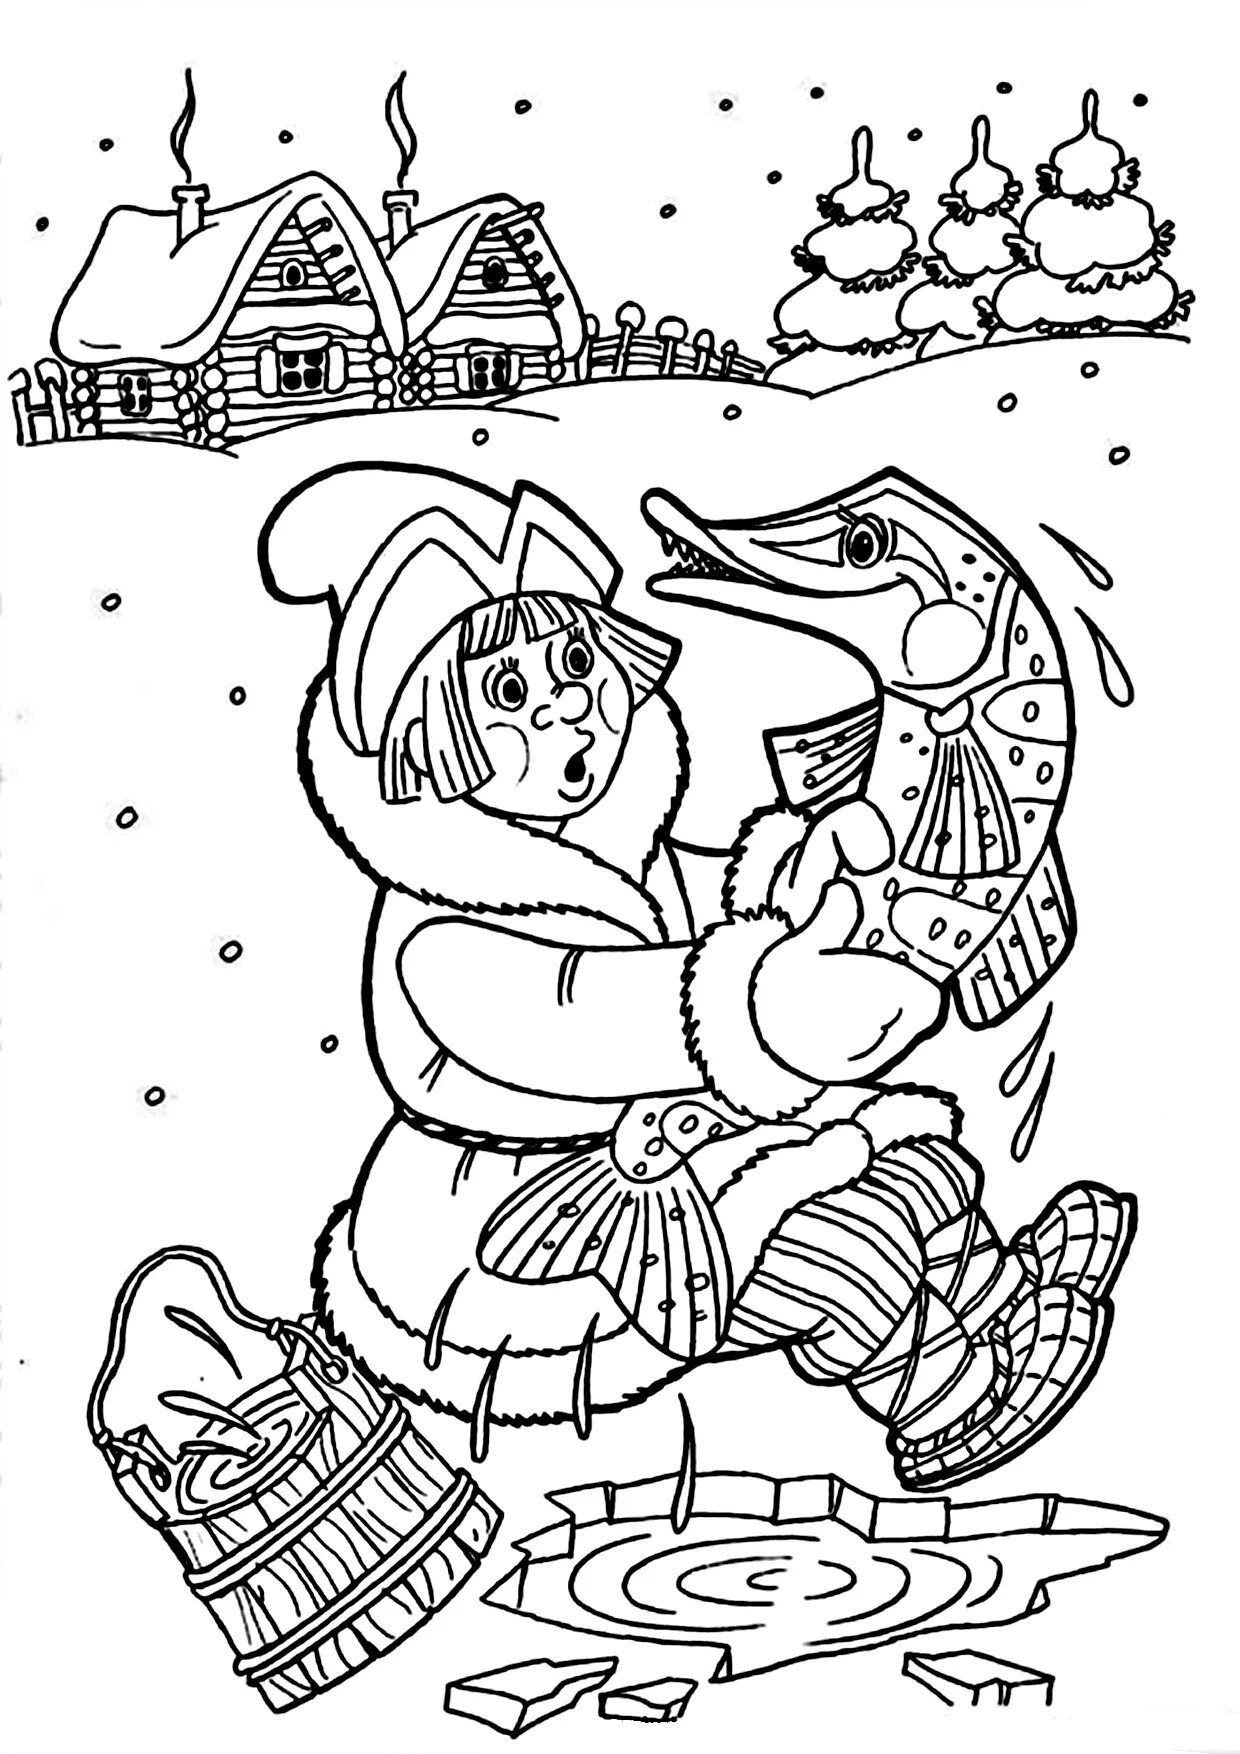 Attractive fairy tale coloring pages